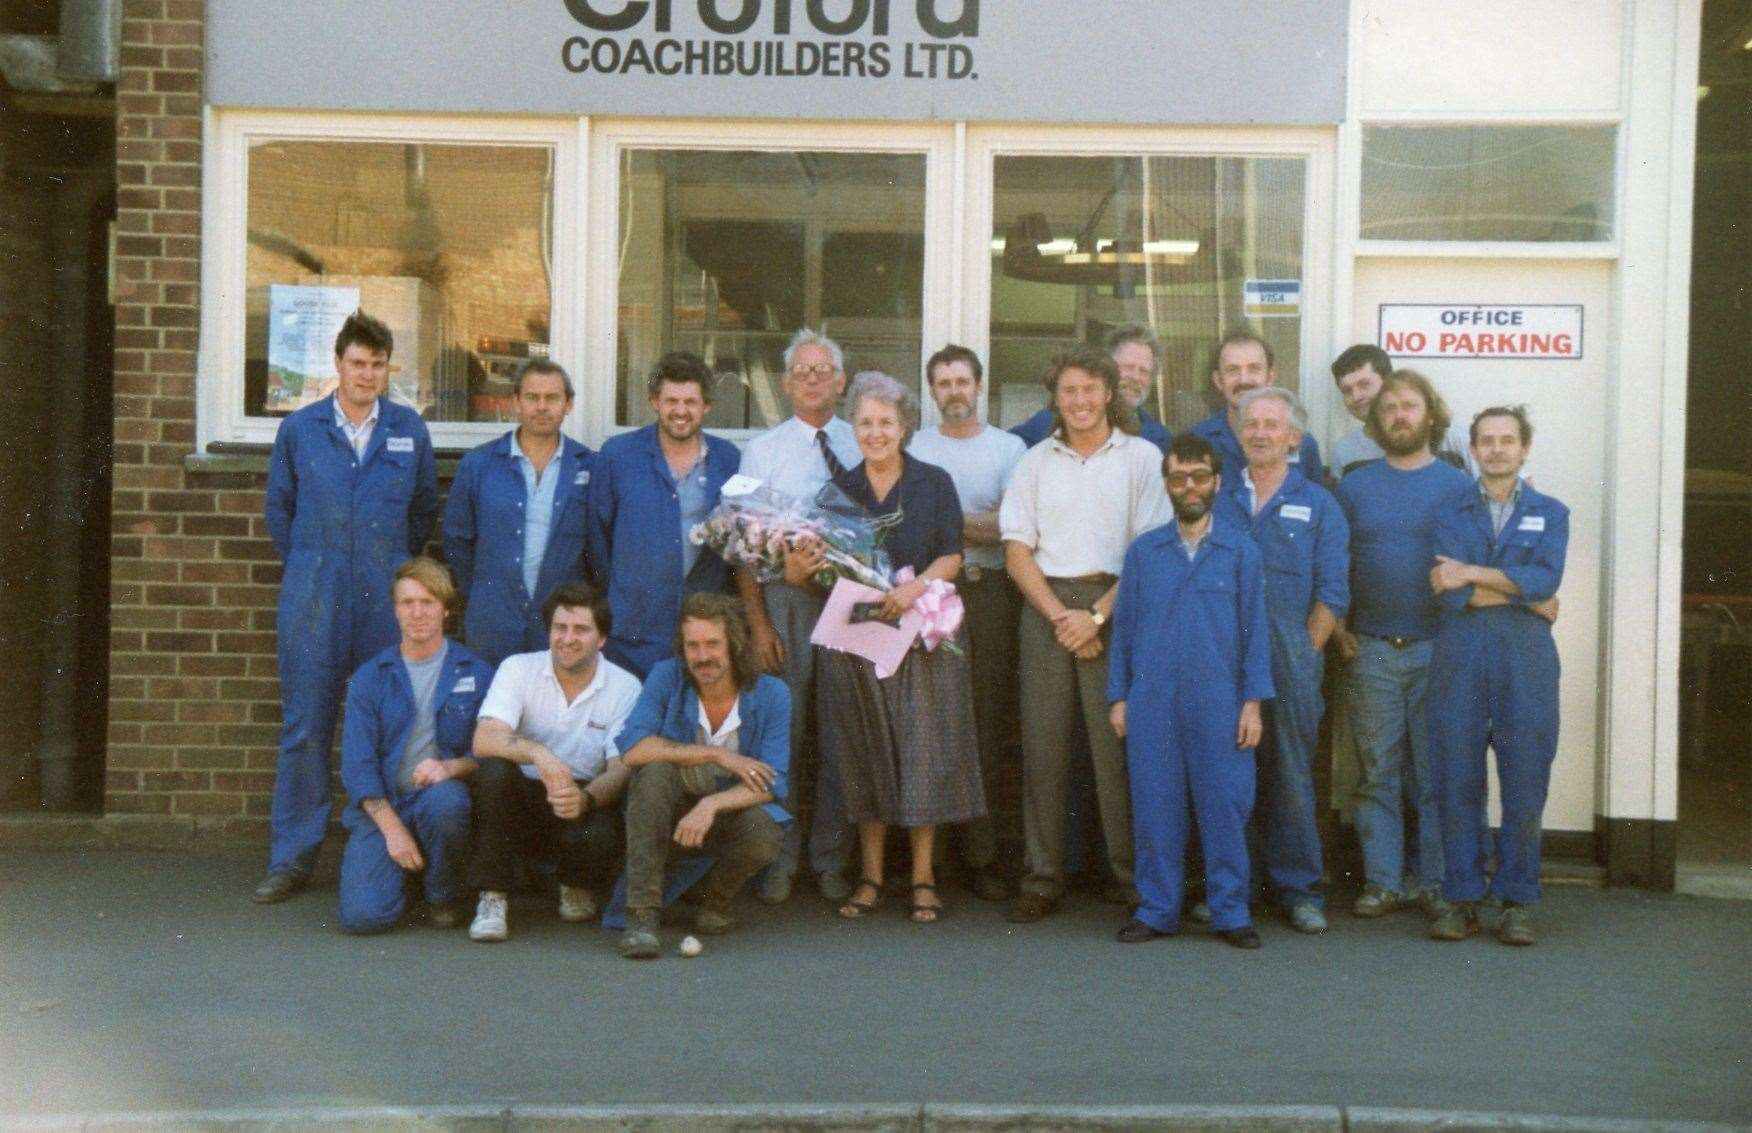 The Croford’s team outside the business’s front entrance